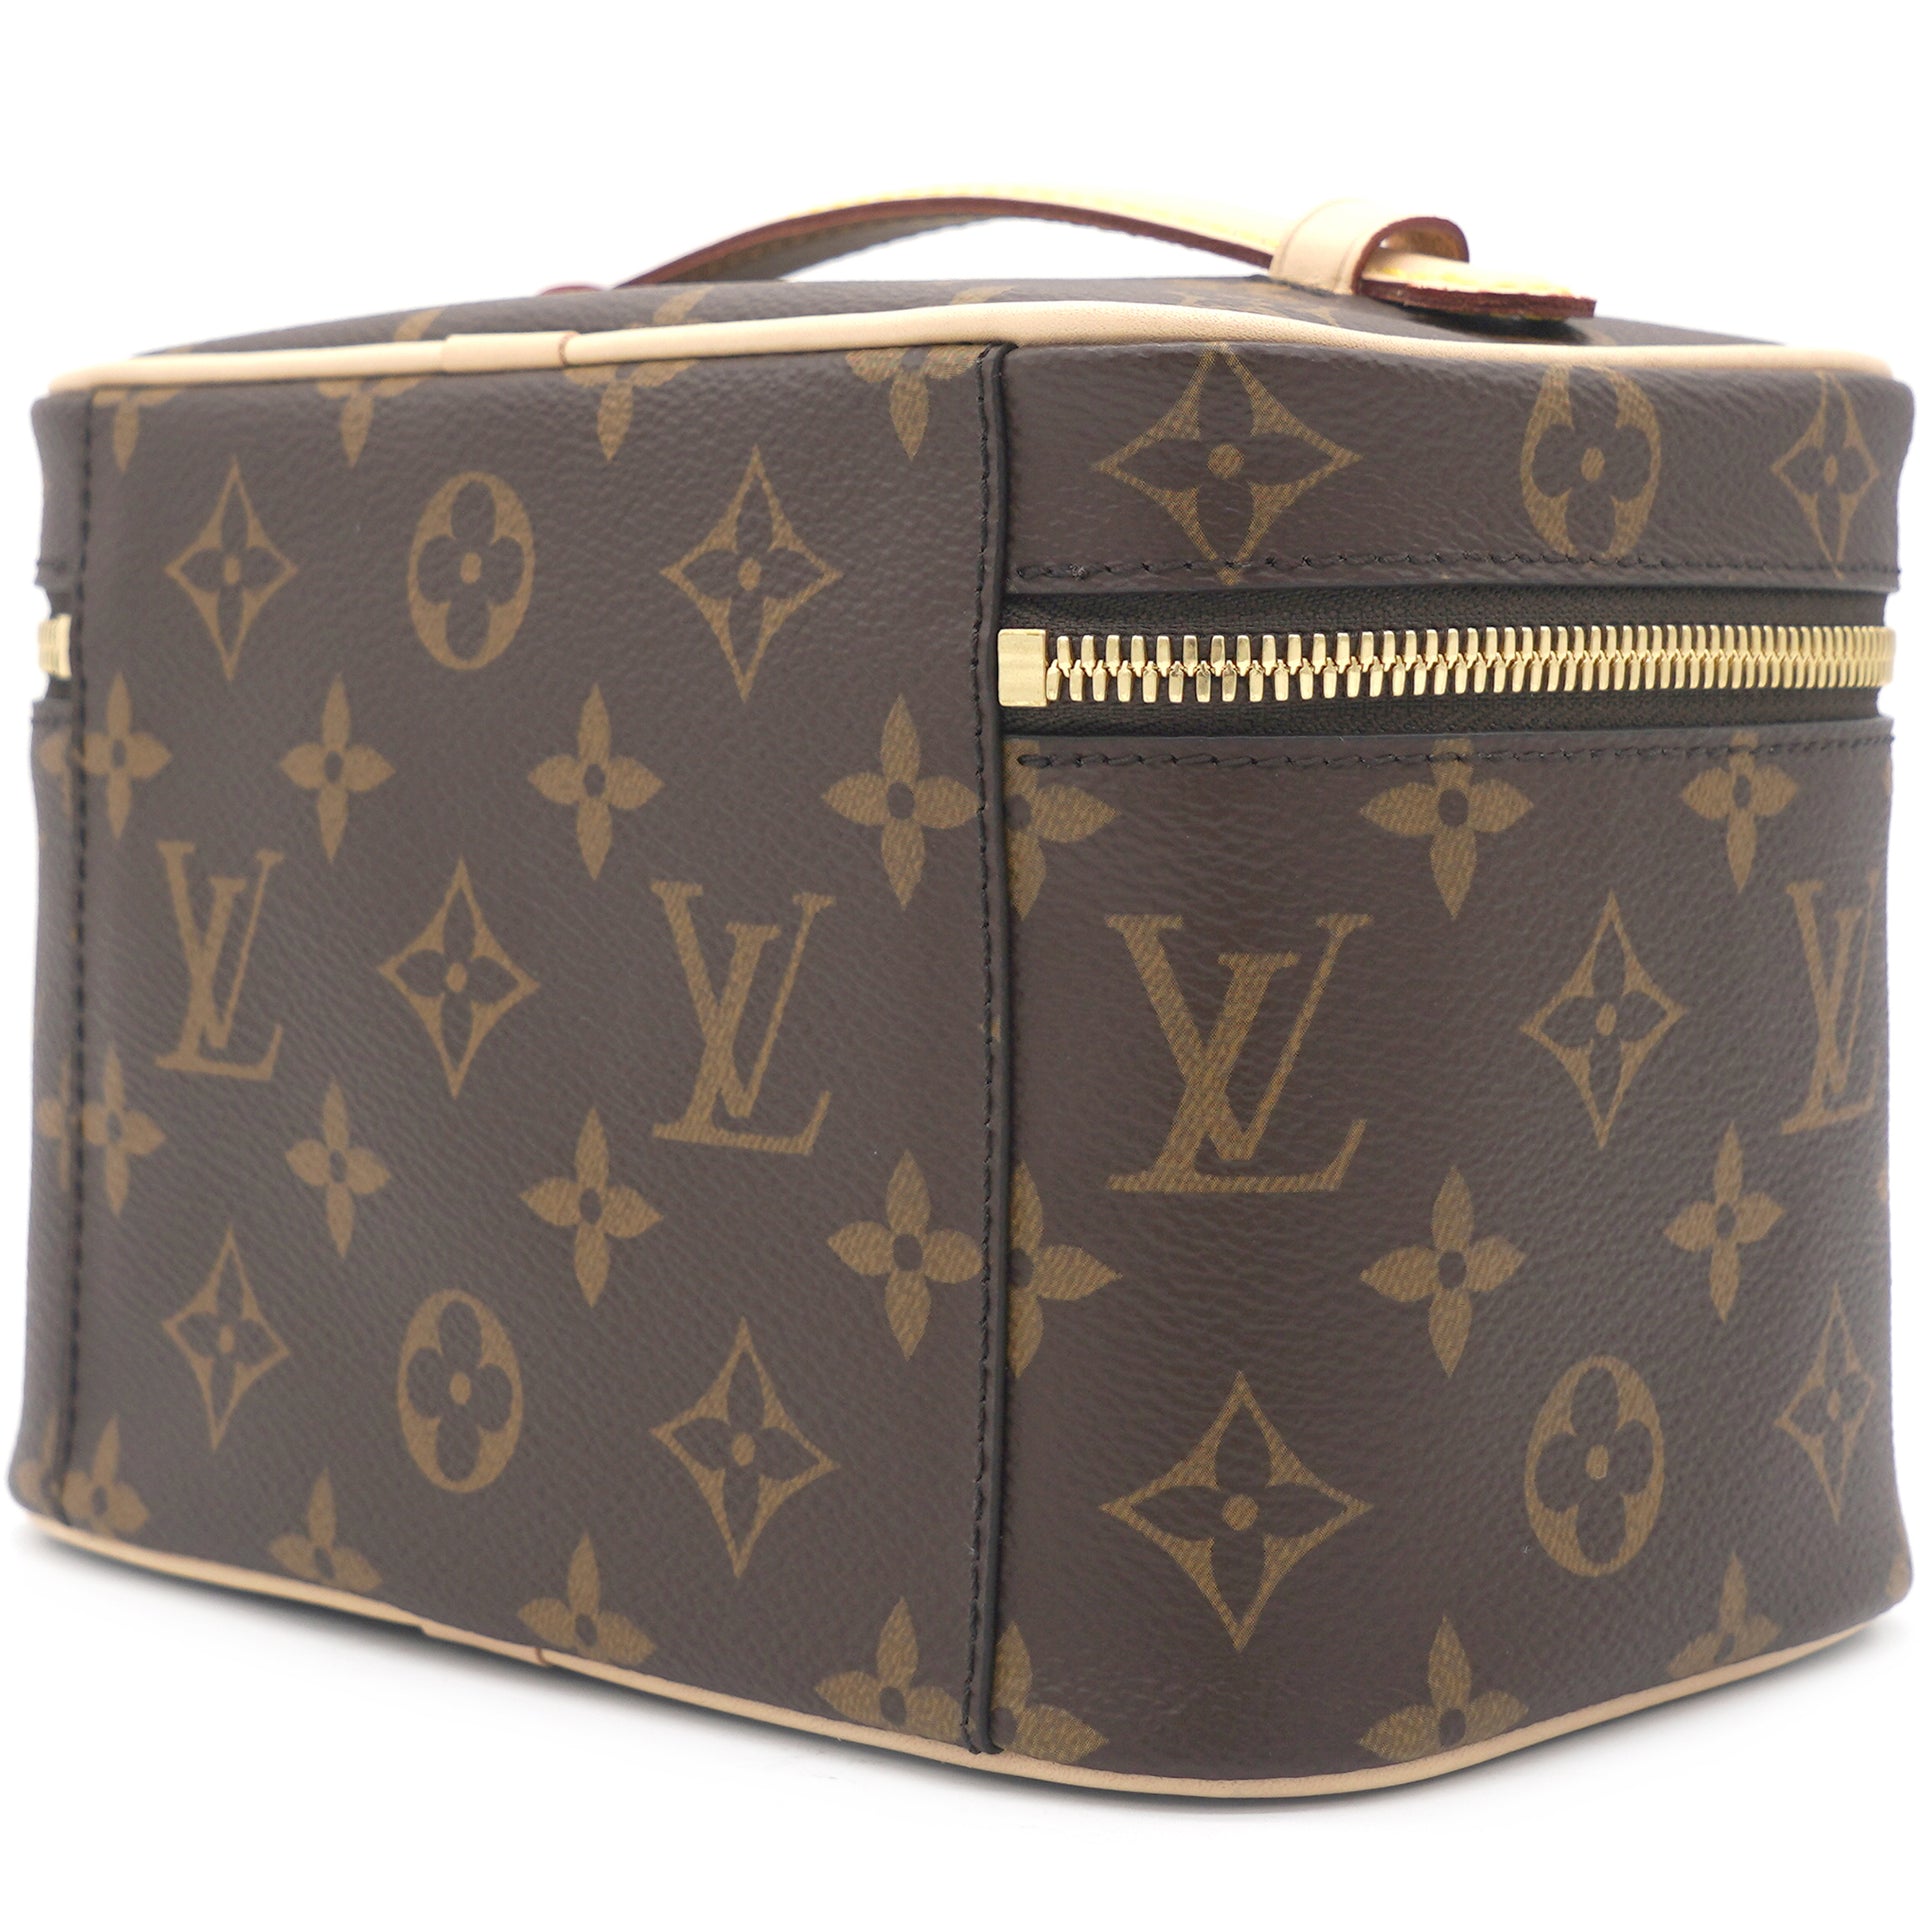 Louis Vuitton Nice BB Vanity Case Review - Is It Worth The Money? 